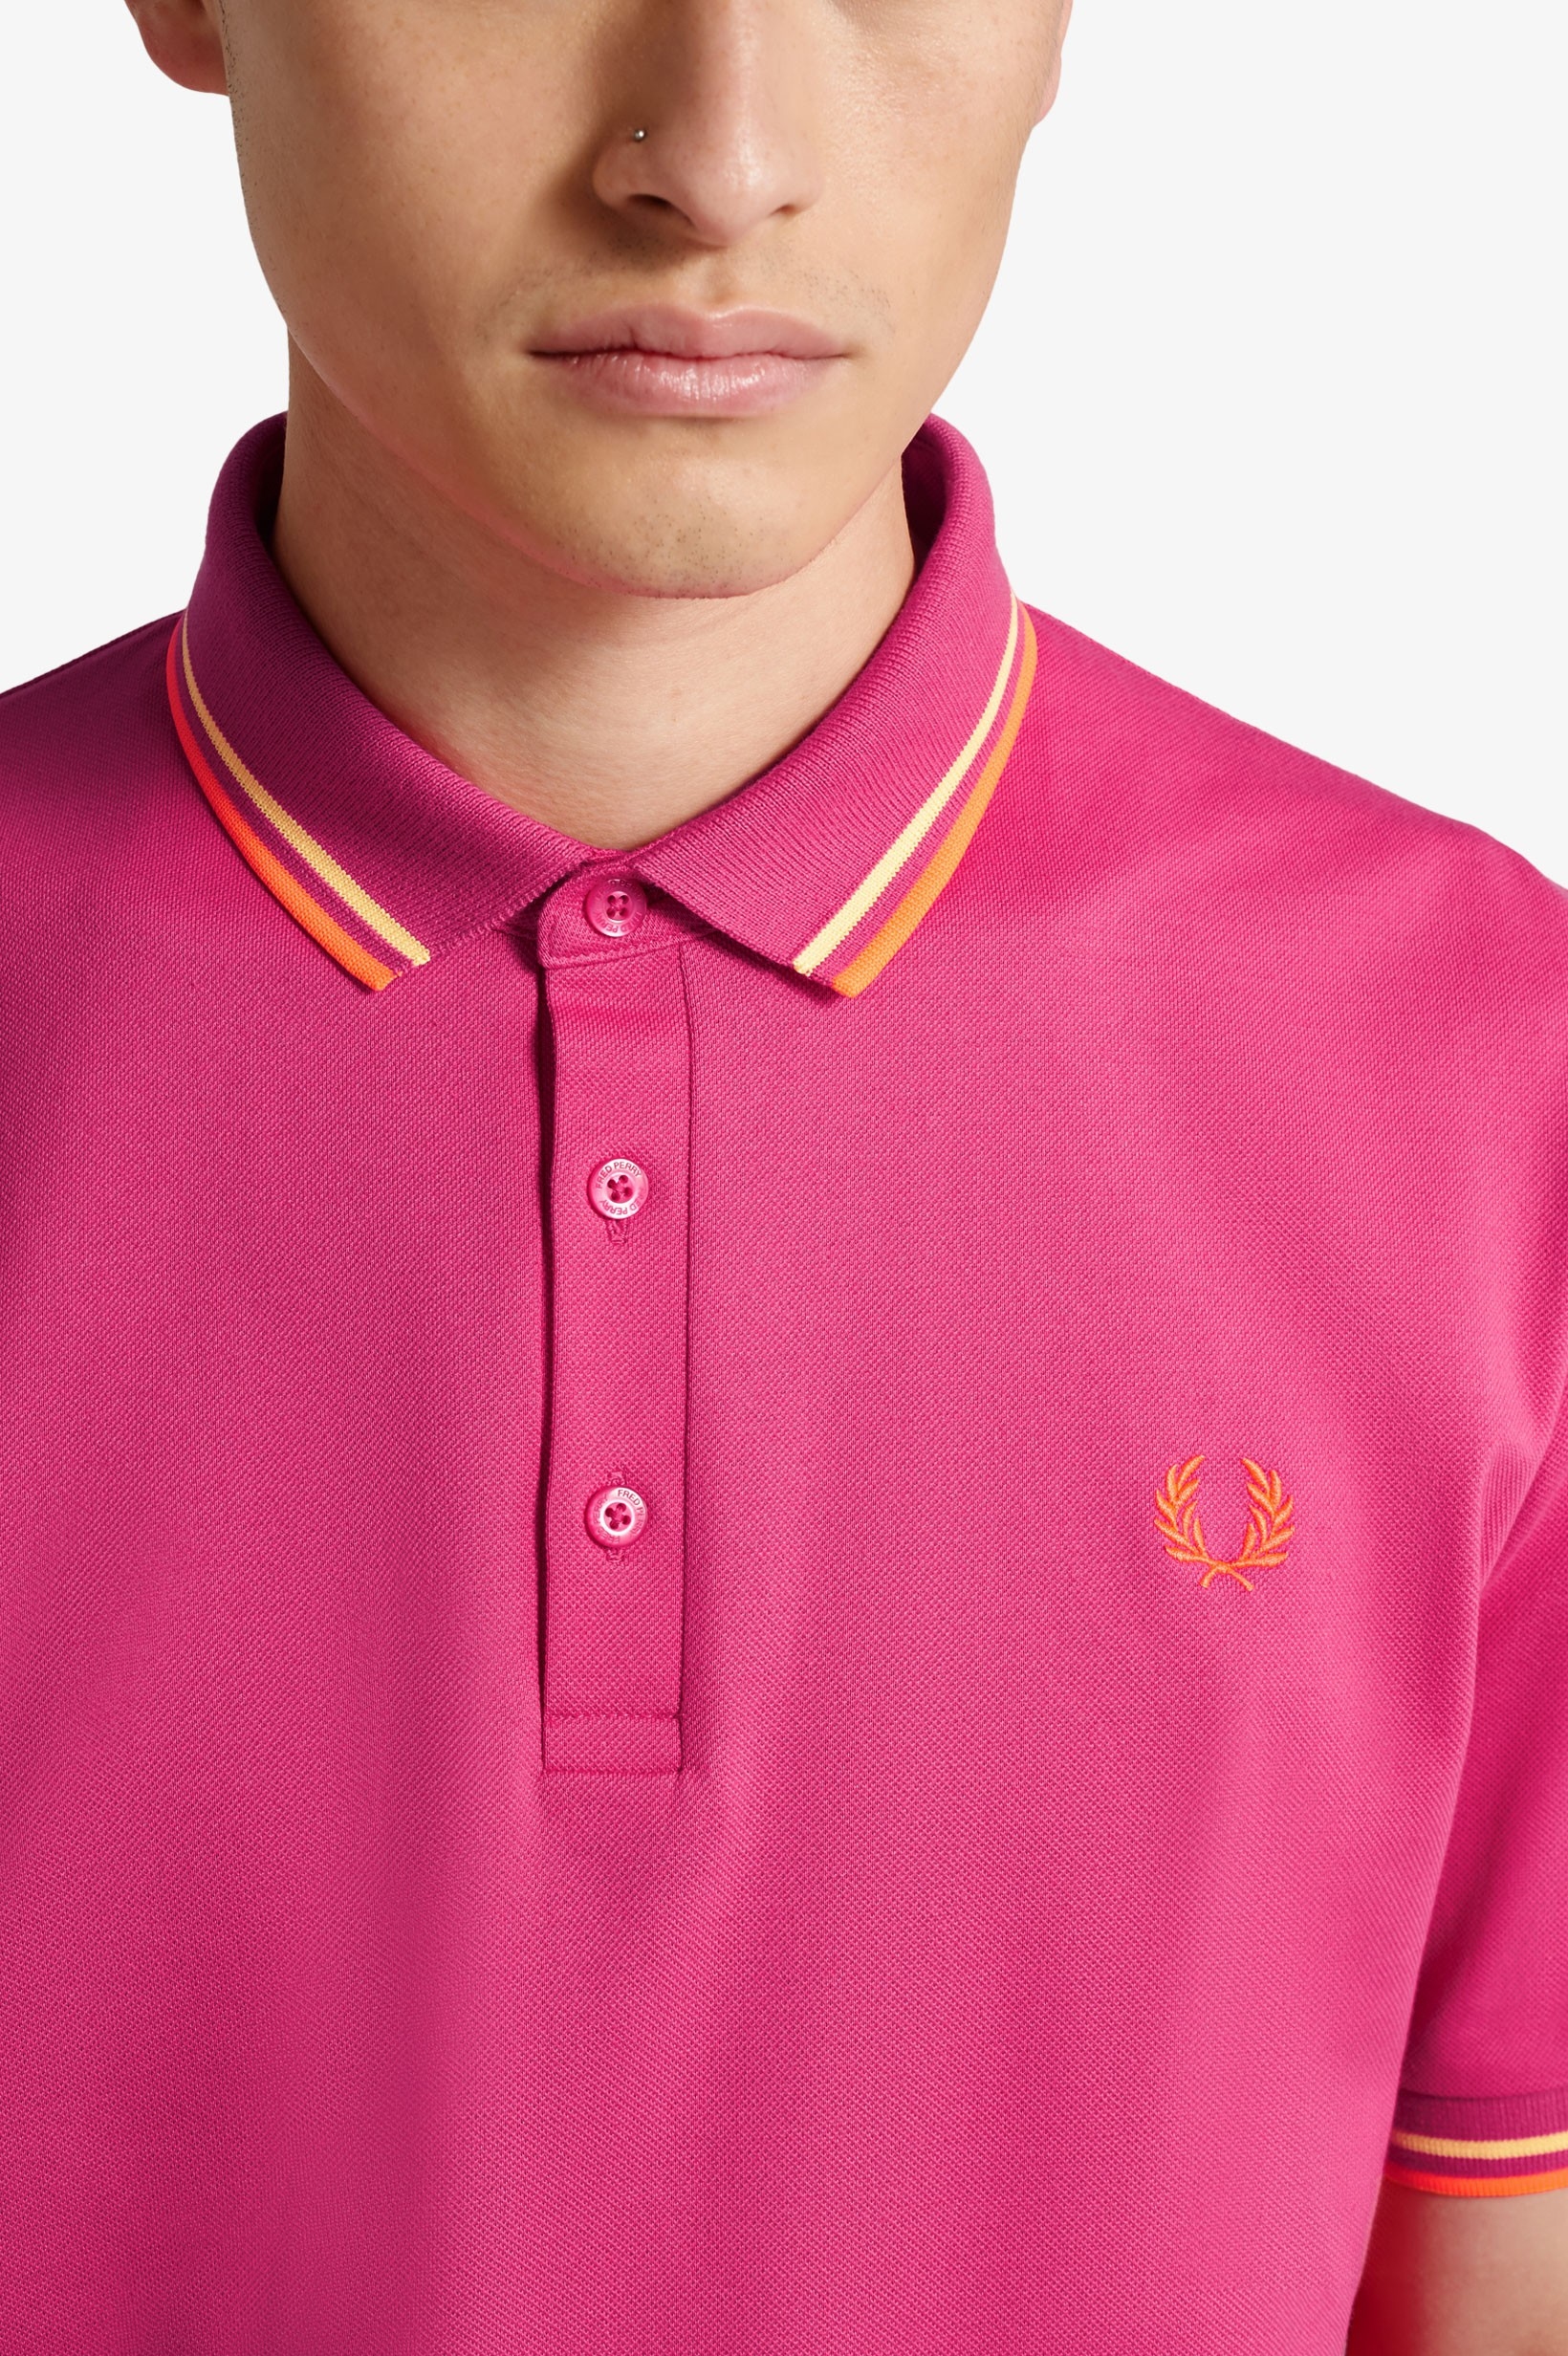 Fred Perry 經典日本製 M102 Polo 衫 - 桃紅